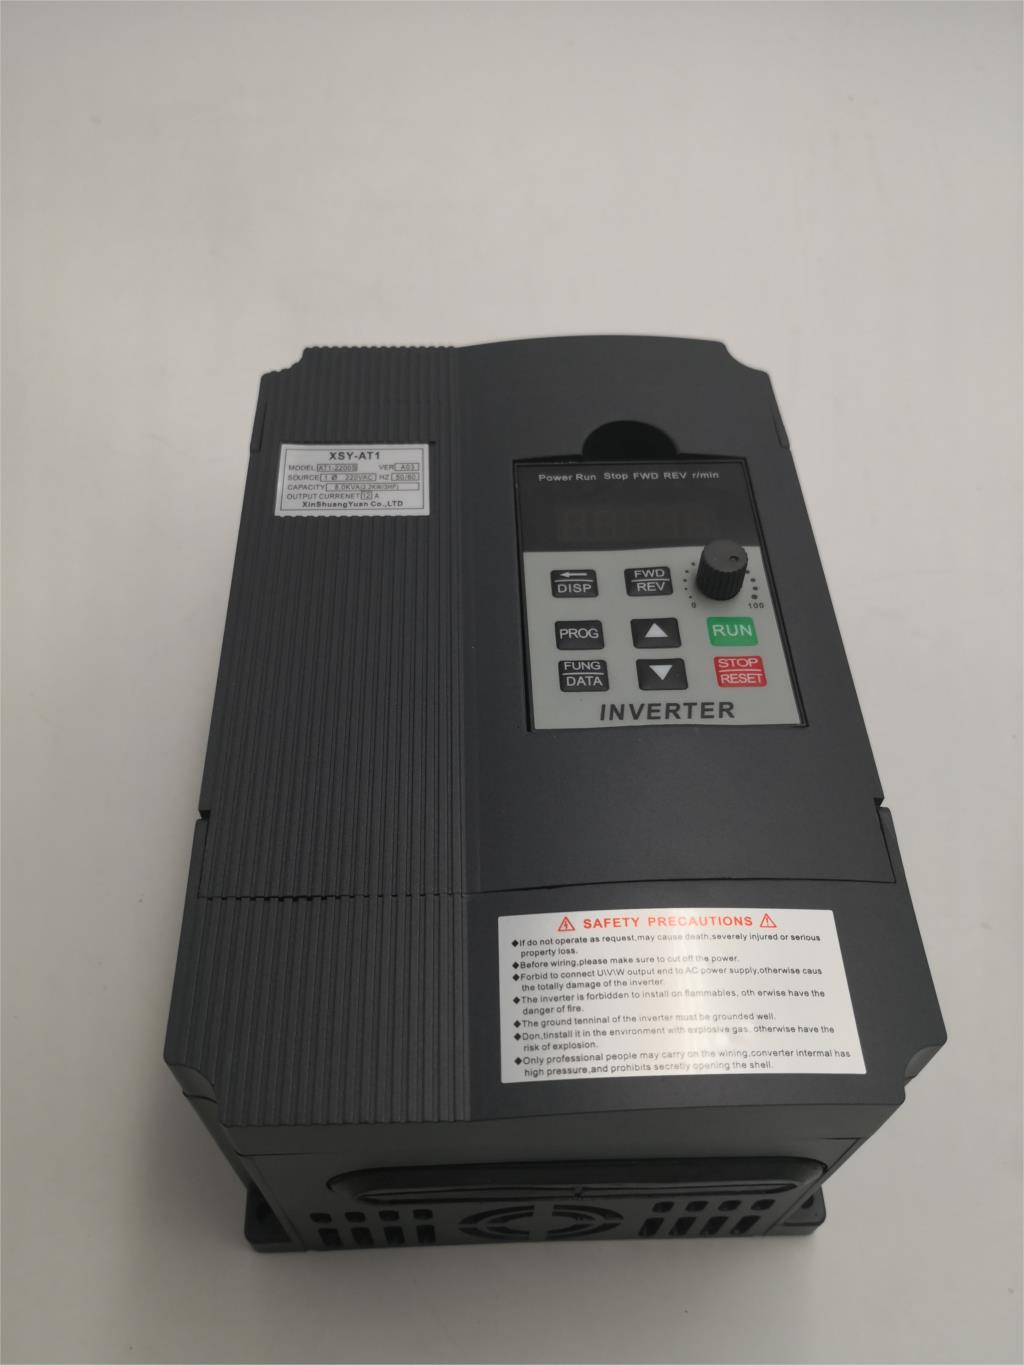 VFD Inverter 1.5KW/2.2KW/4KW Frequency Converter ZW-AT1 3P 220V/110V Output CNC Spindle Motor Speed Control XSY-AT1